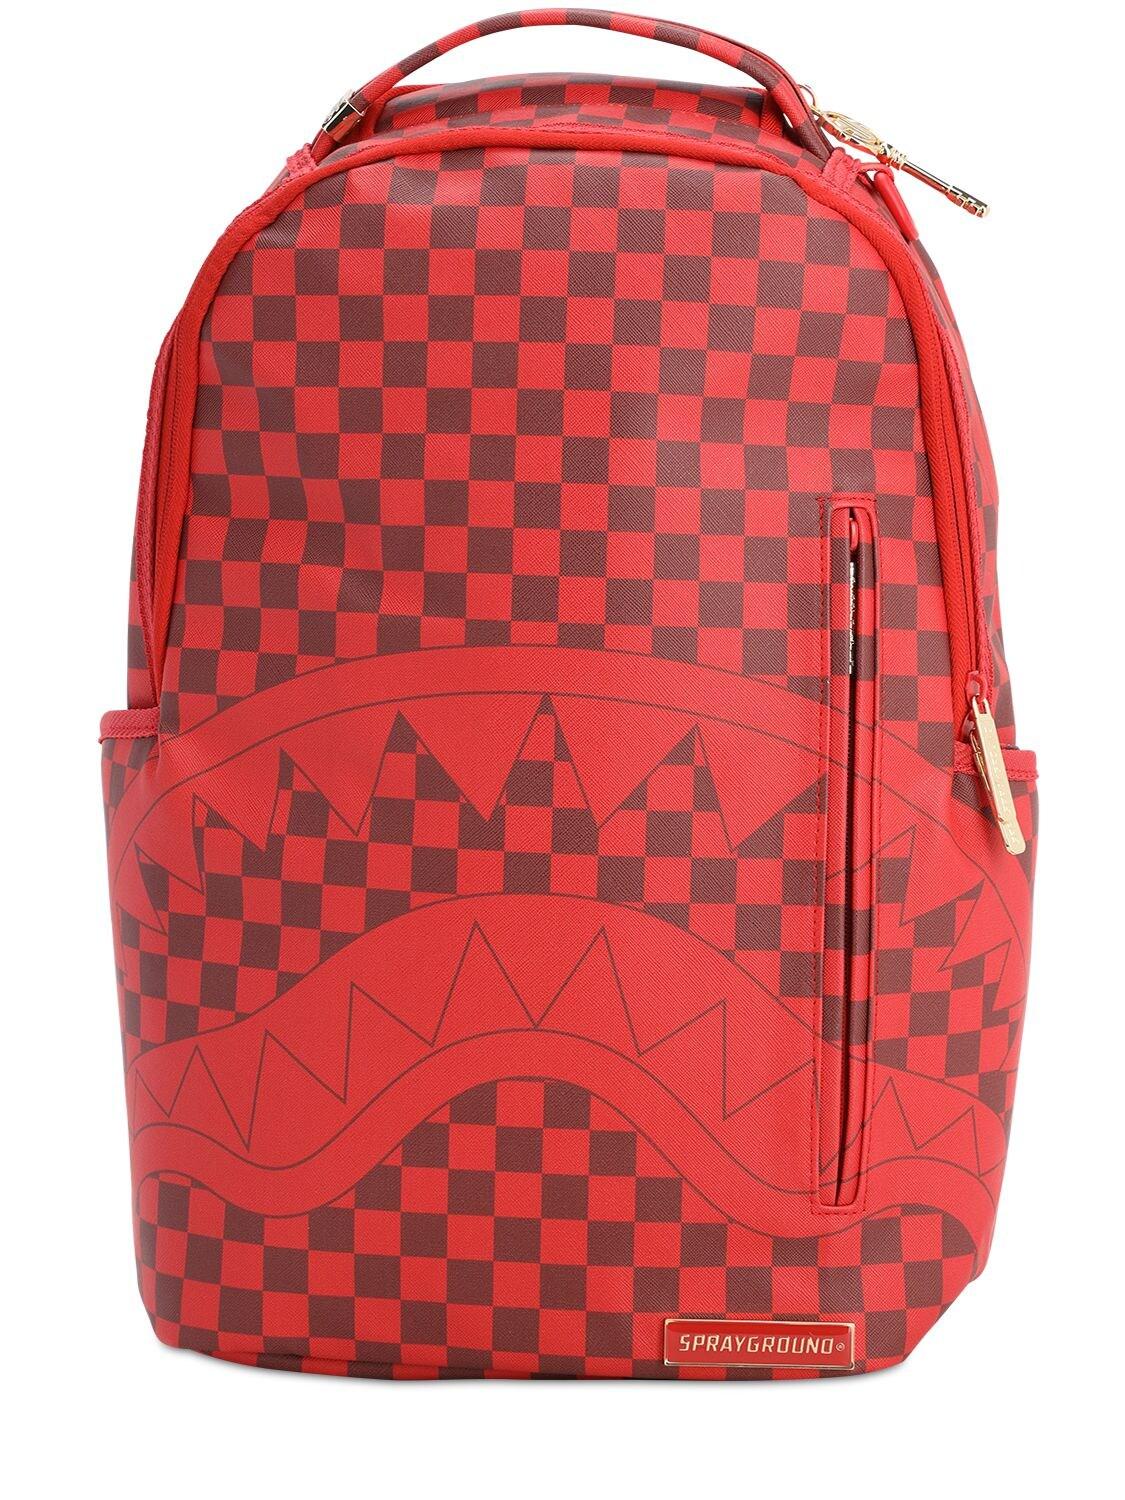 Sprayground Todd Gurley Backpack In Red For Men Lyst